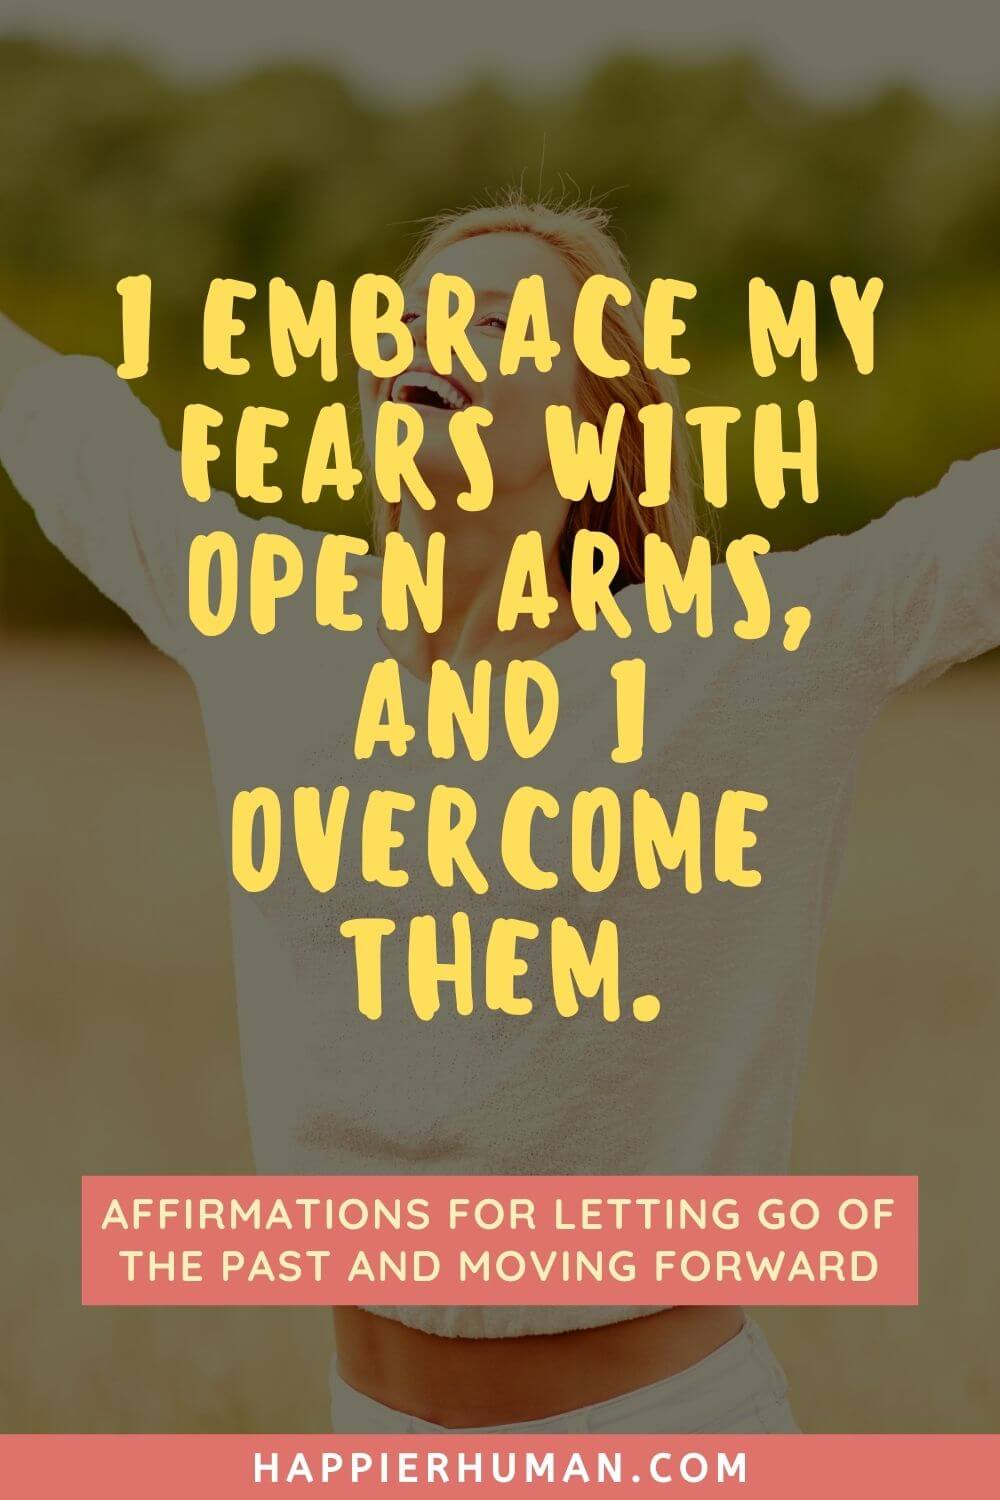 Affirmations for Letting Go - I embrace my fears with open arms, and I overcome them | mantras for letting go of the past | affirmations to get over a crush | affirmations to let go of anger